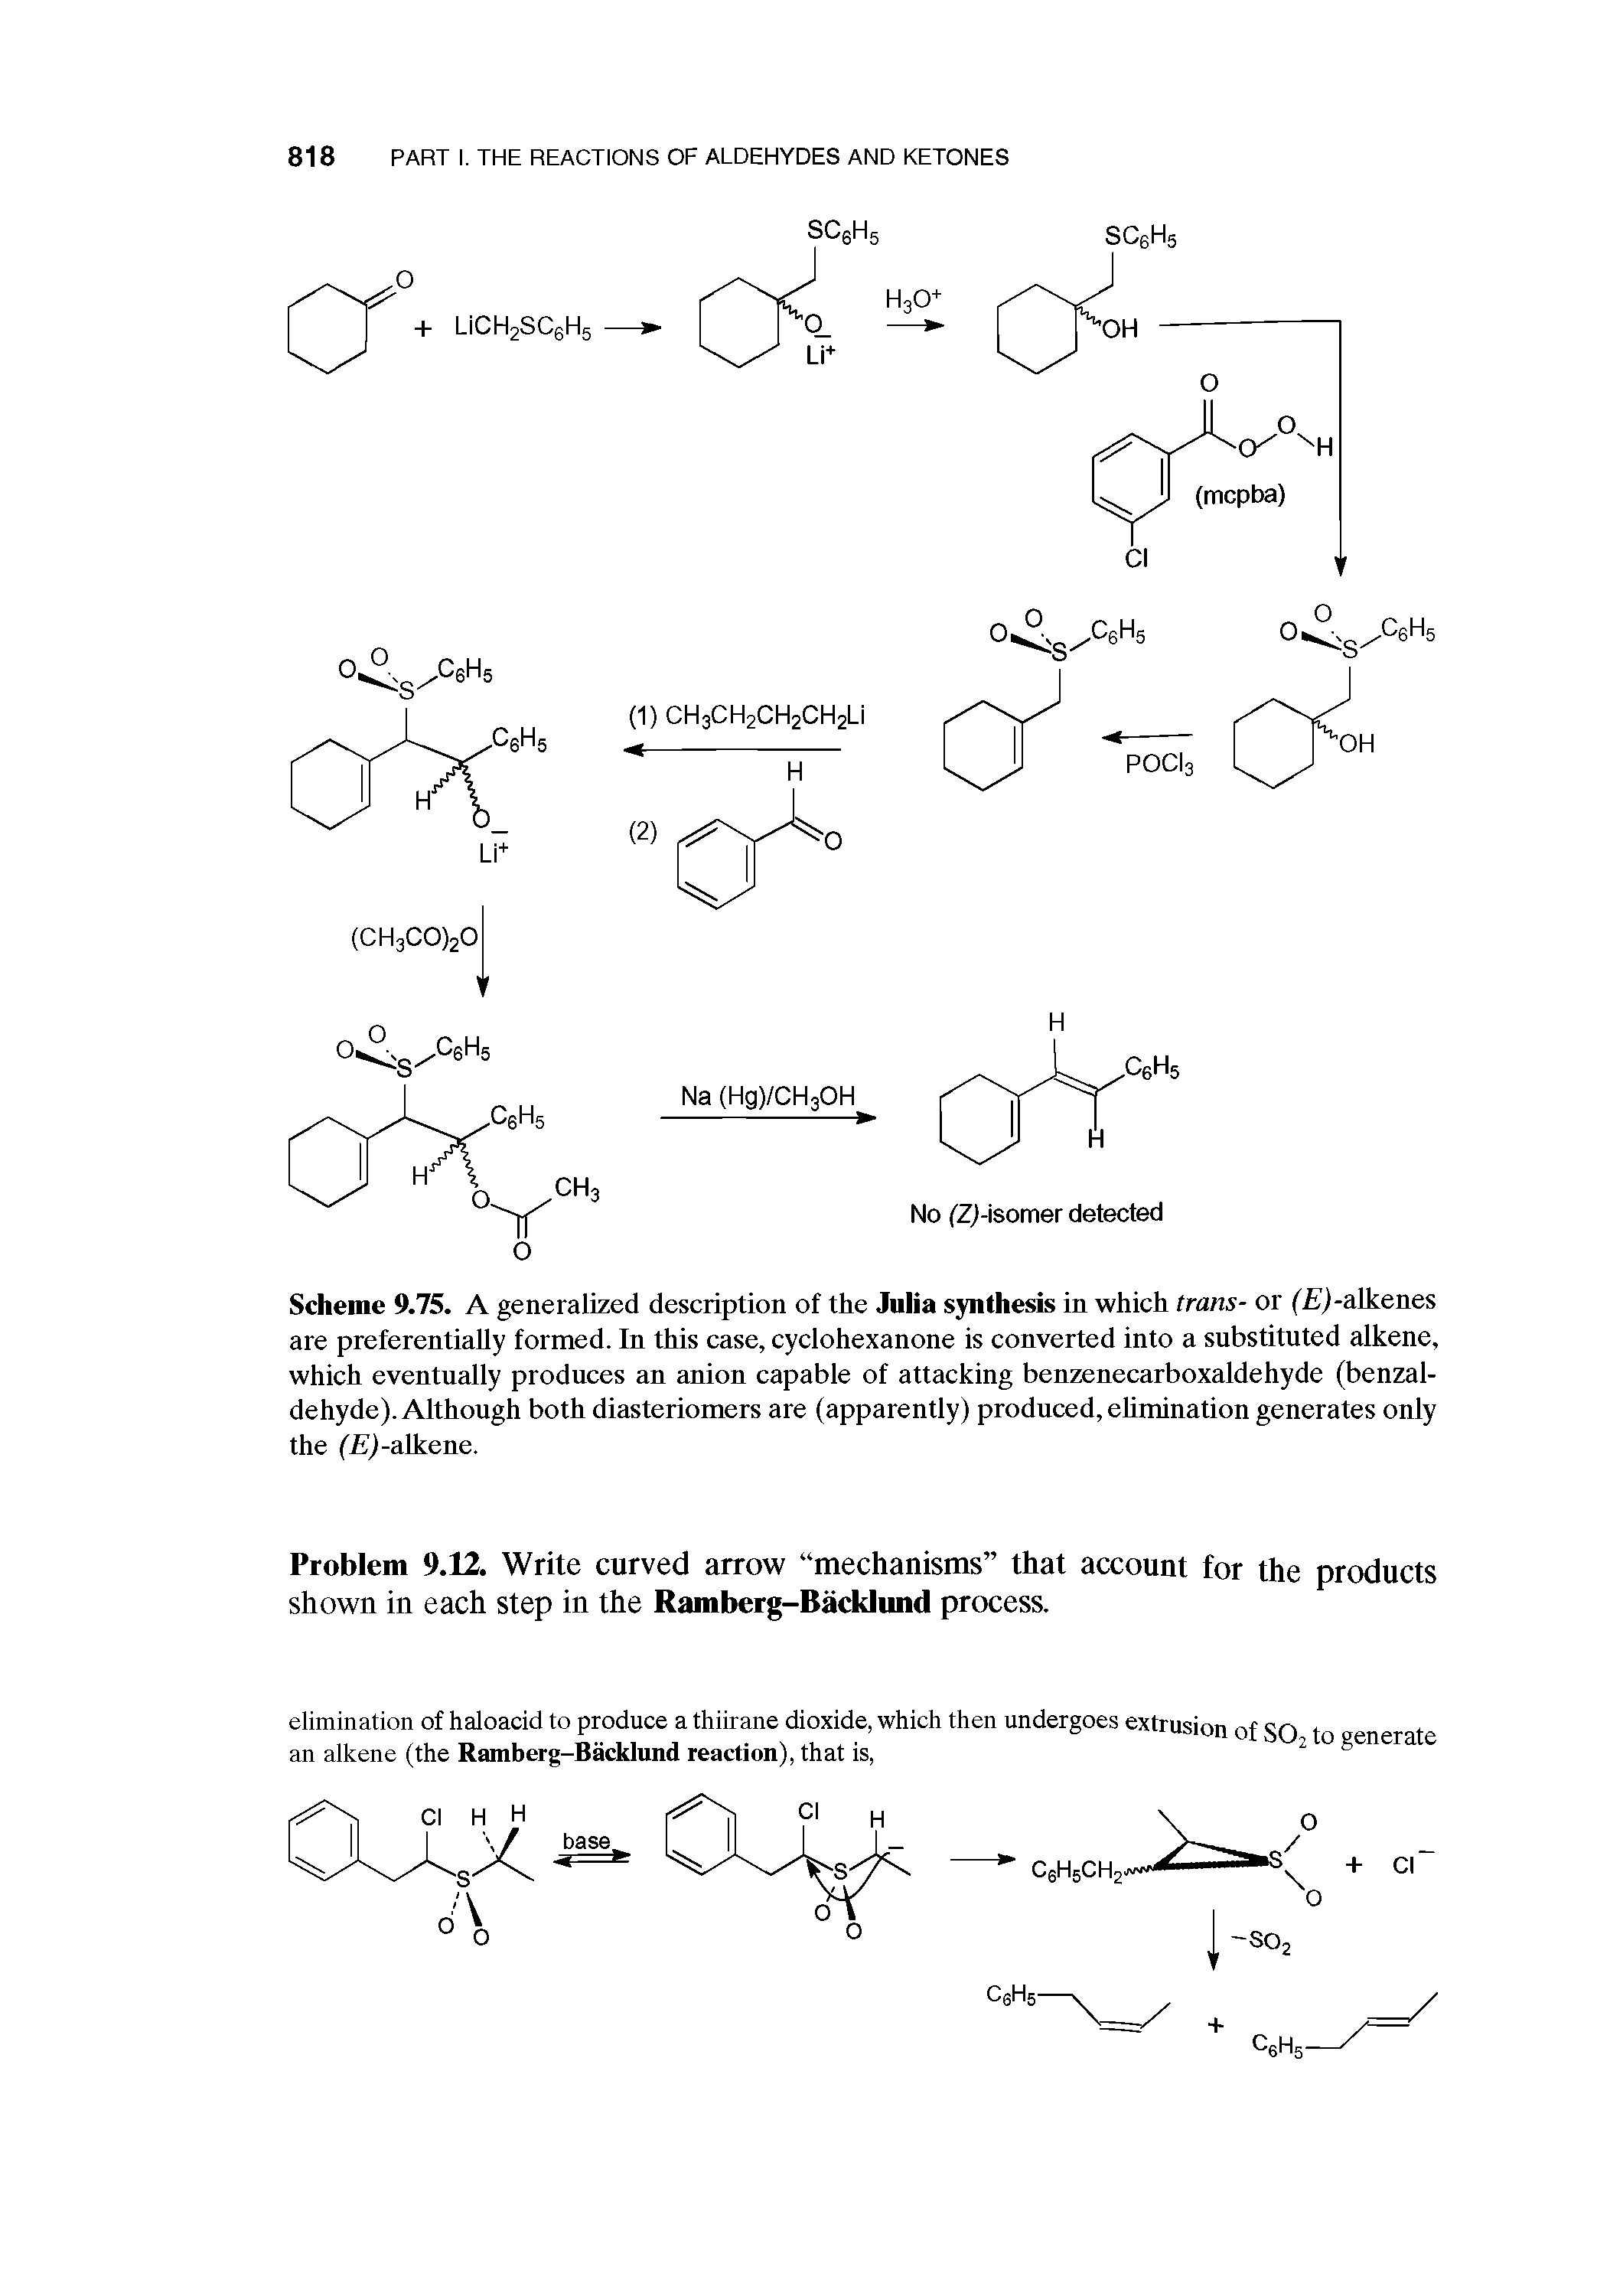 Scheme 9.75. A generalized description of the Julia synthesis in which trans- or fisj-alkenes are preferentially formed. In this case, cyclohexanone is converted into a substituted alkene, which eventually produces an anion capable of attacking benzenecarboxaldehyde (benzal-dehyde). Although both diasteriomers are (apparently) produced, ehmination generates only the ( )-alkene.